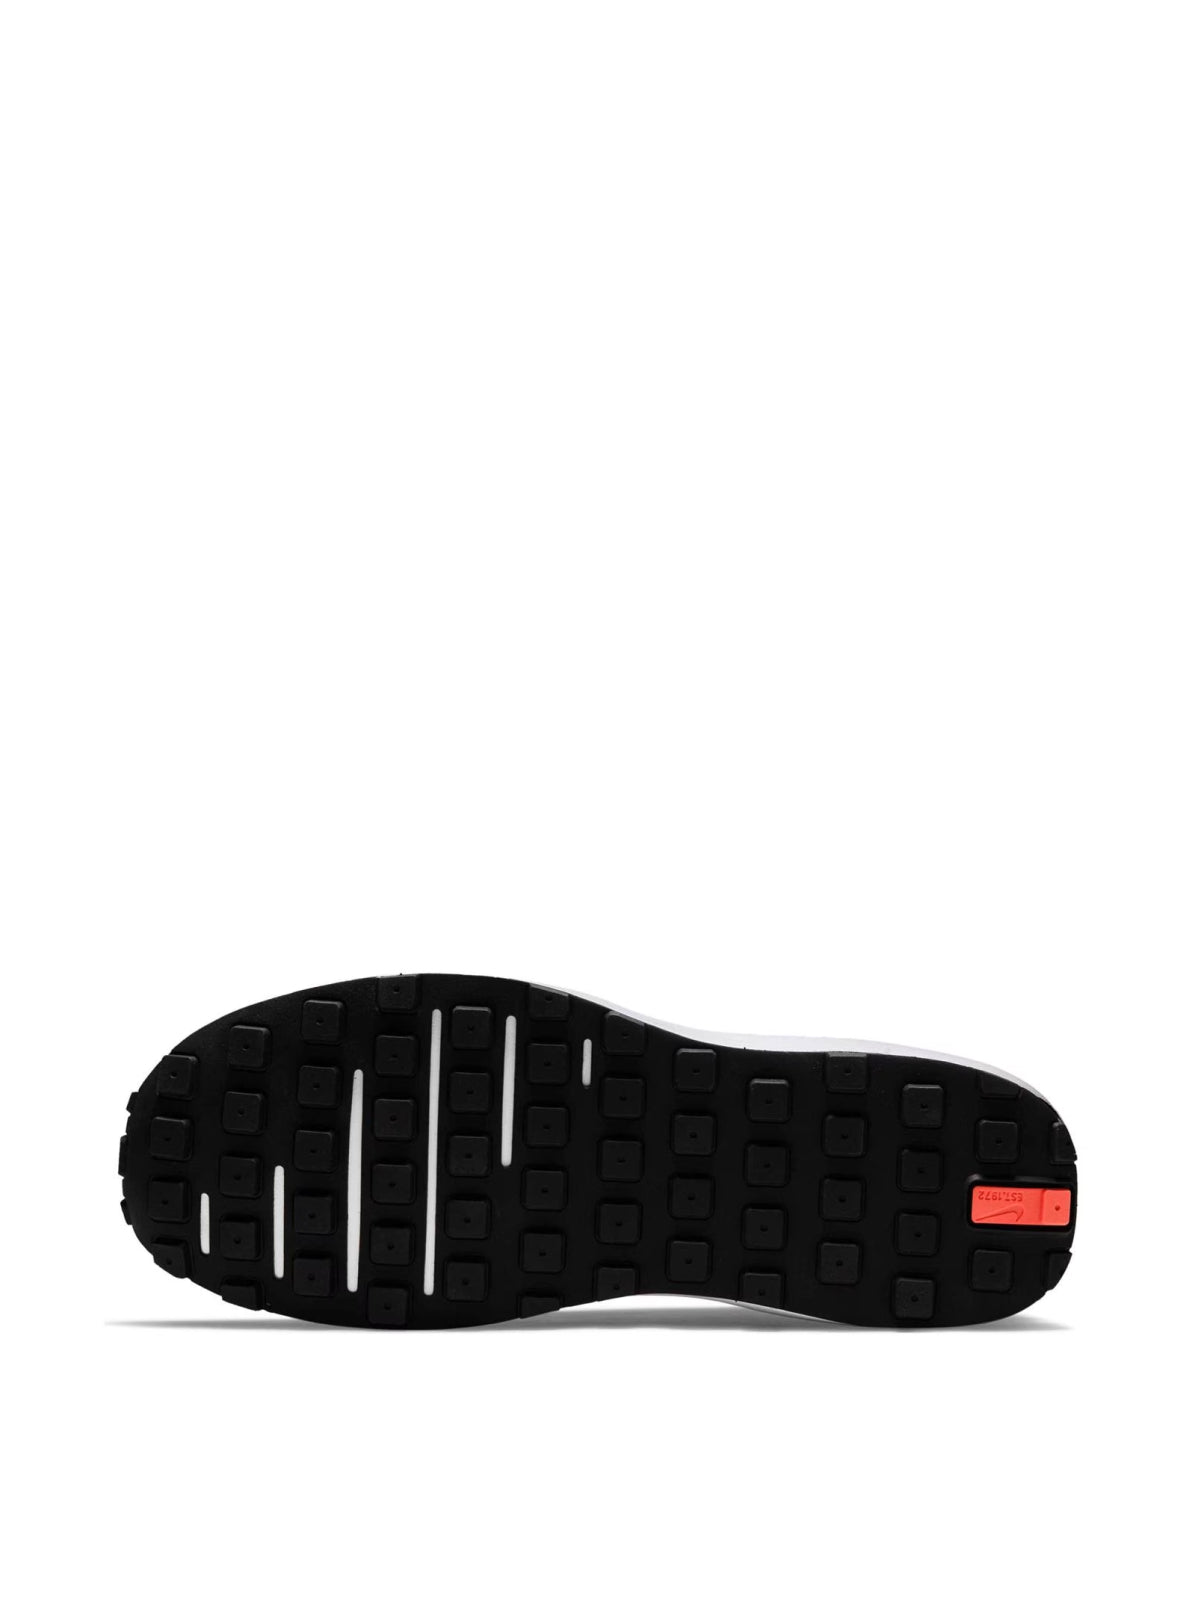 Nike-OUTLET-SALE-Waffle One Sneakers-ARCHIVIST